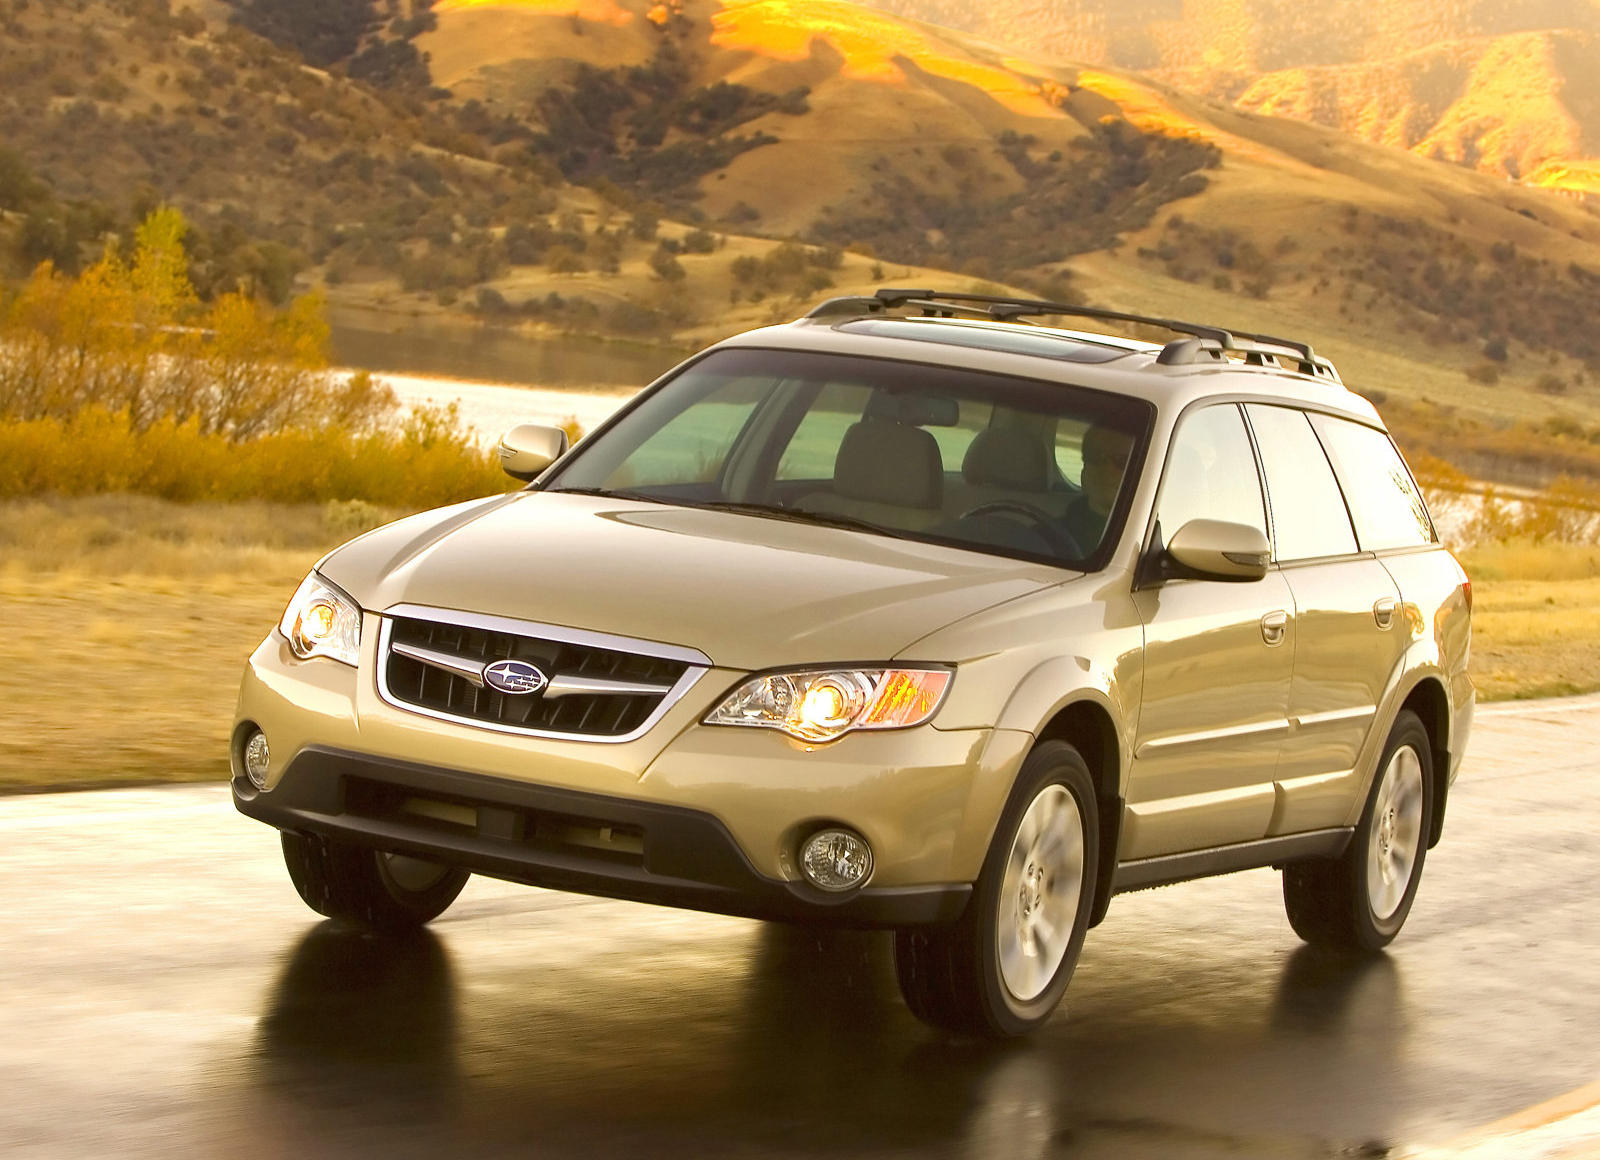 2009 Subaru Outback: Review, Trims, Specs, Price, New Interior Features